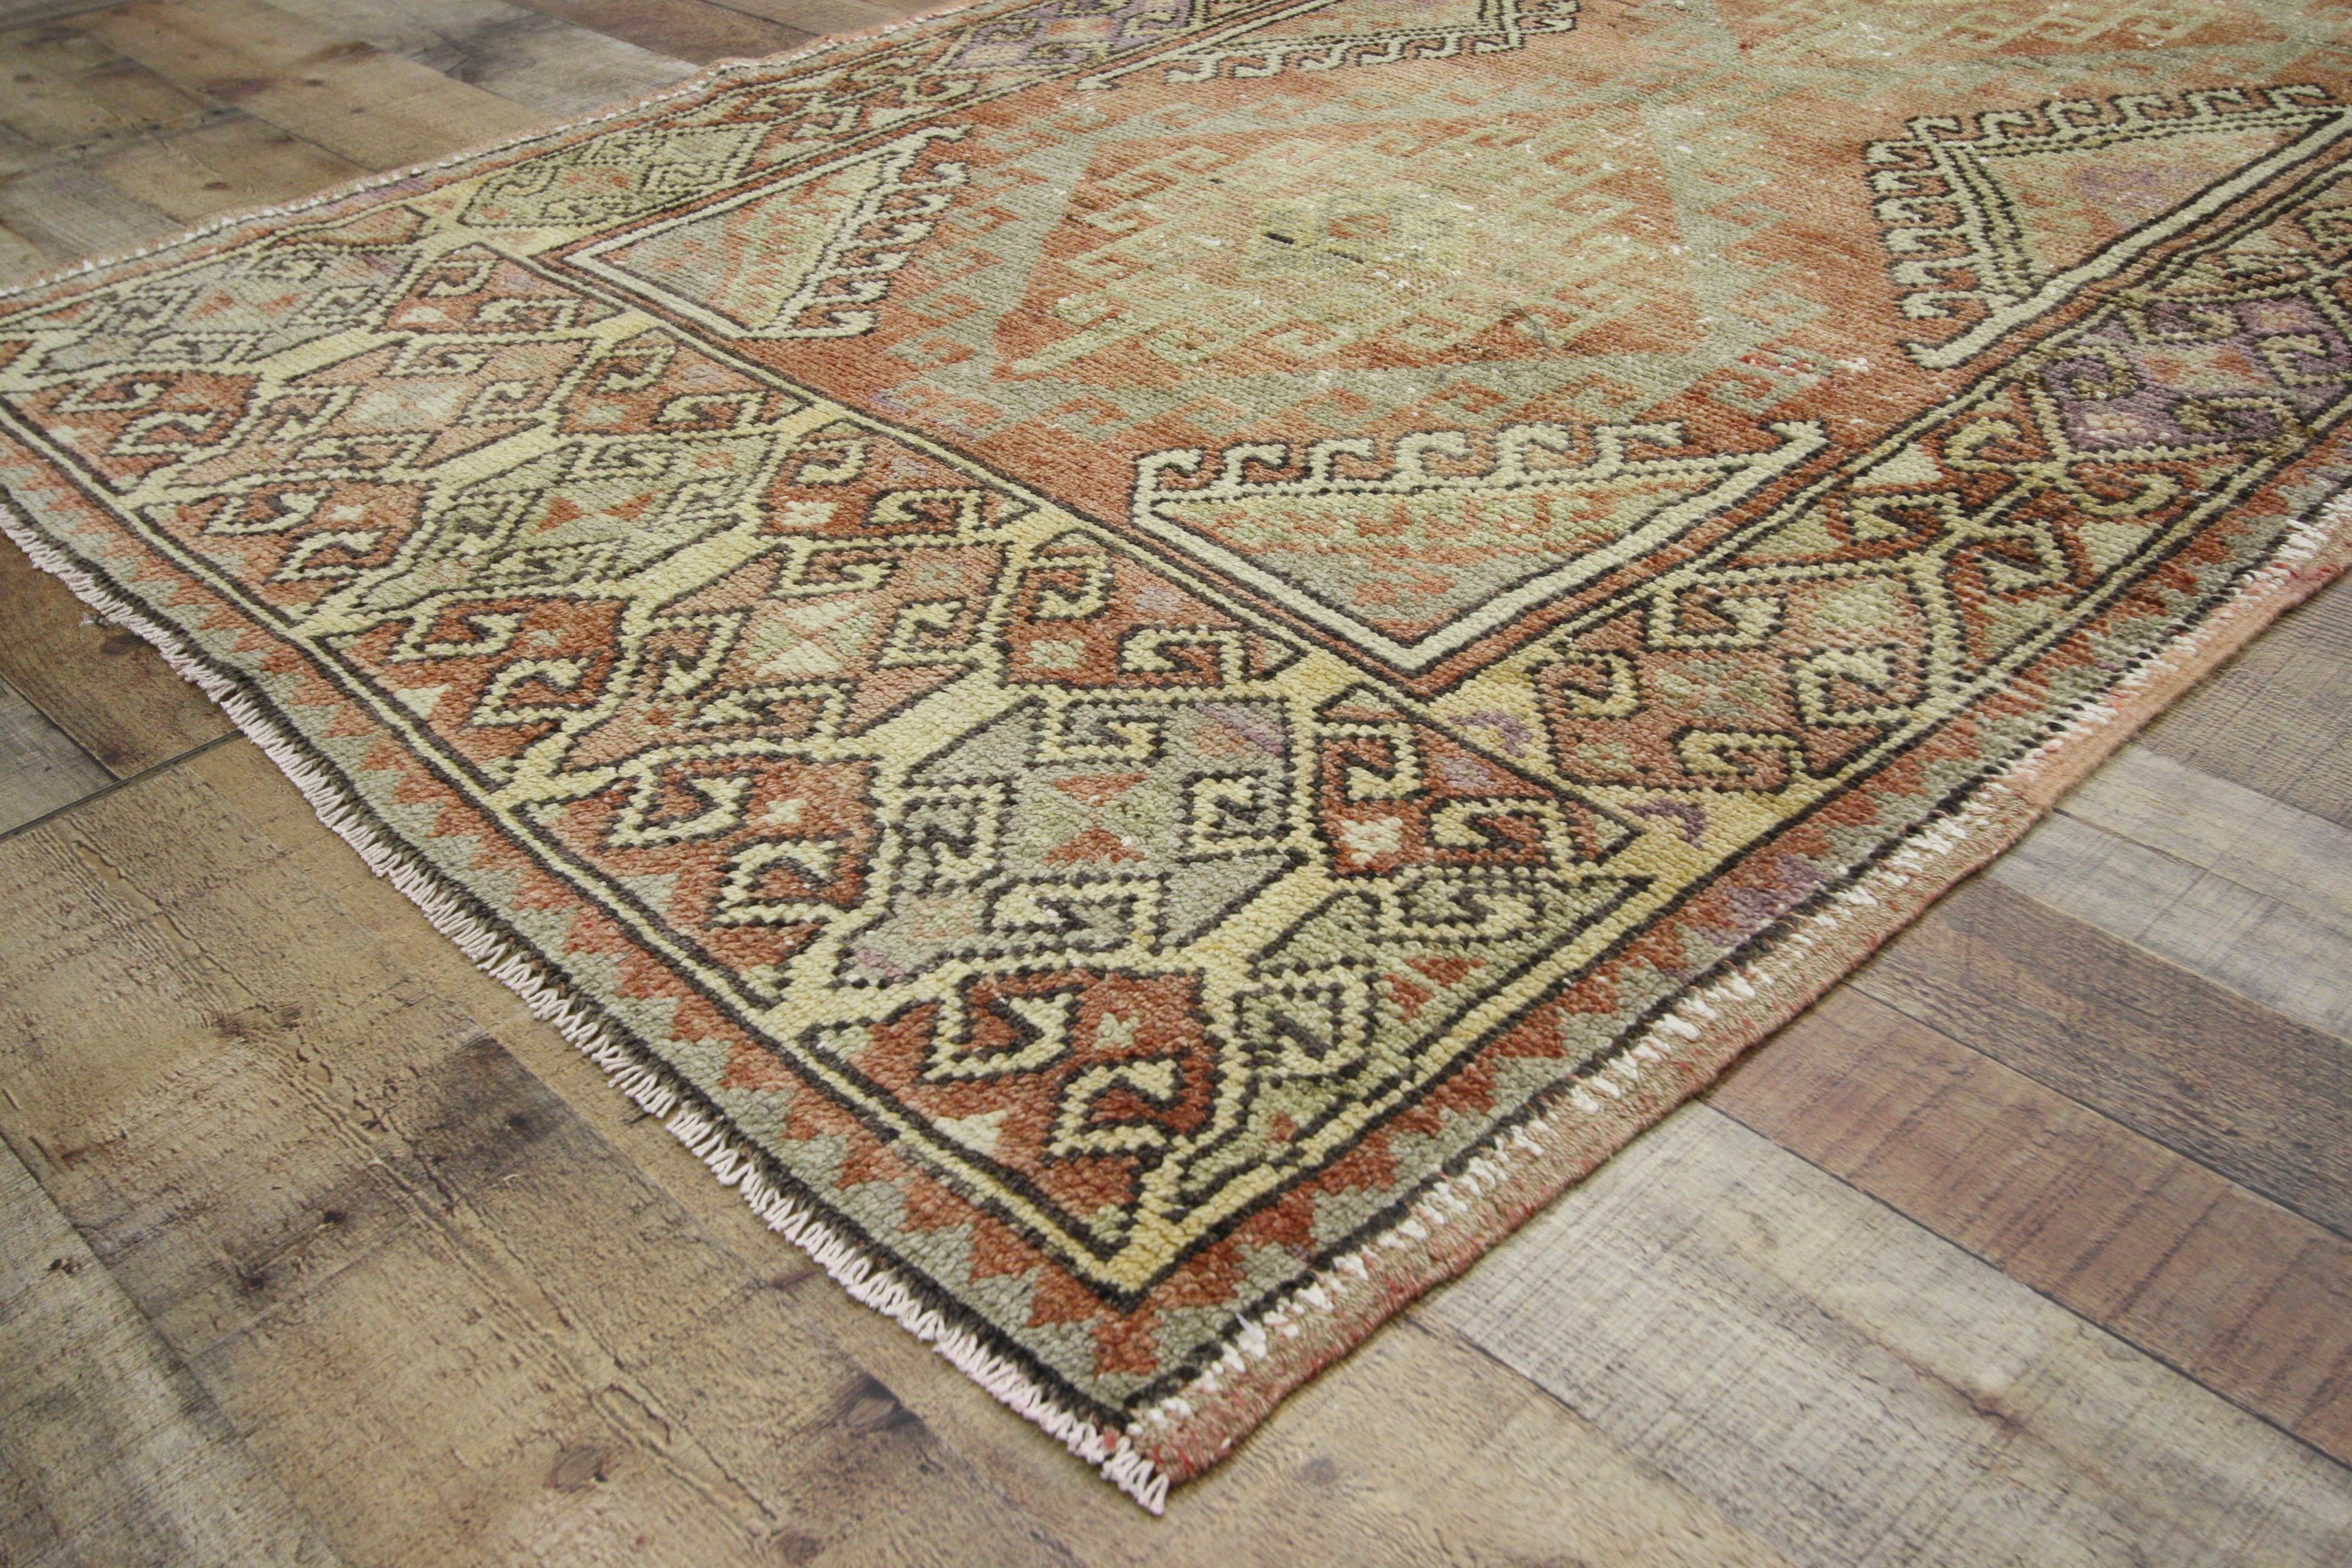 52410 Distressed Vintage Turkish Oushak Runner, Tribal Style Hallway Runner 03'09 x 09'01. This hand-knotted wool vintage Turkish Oushak runner features a triple medallion design of concentric hooked diamonds spread across an abrashed terra cotta